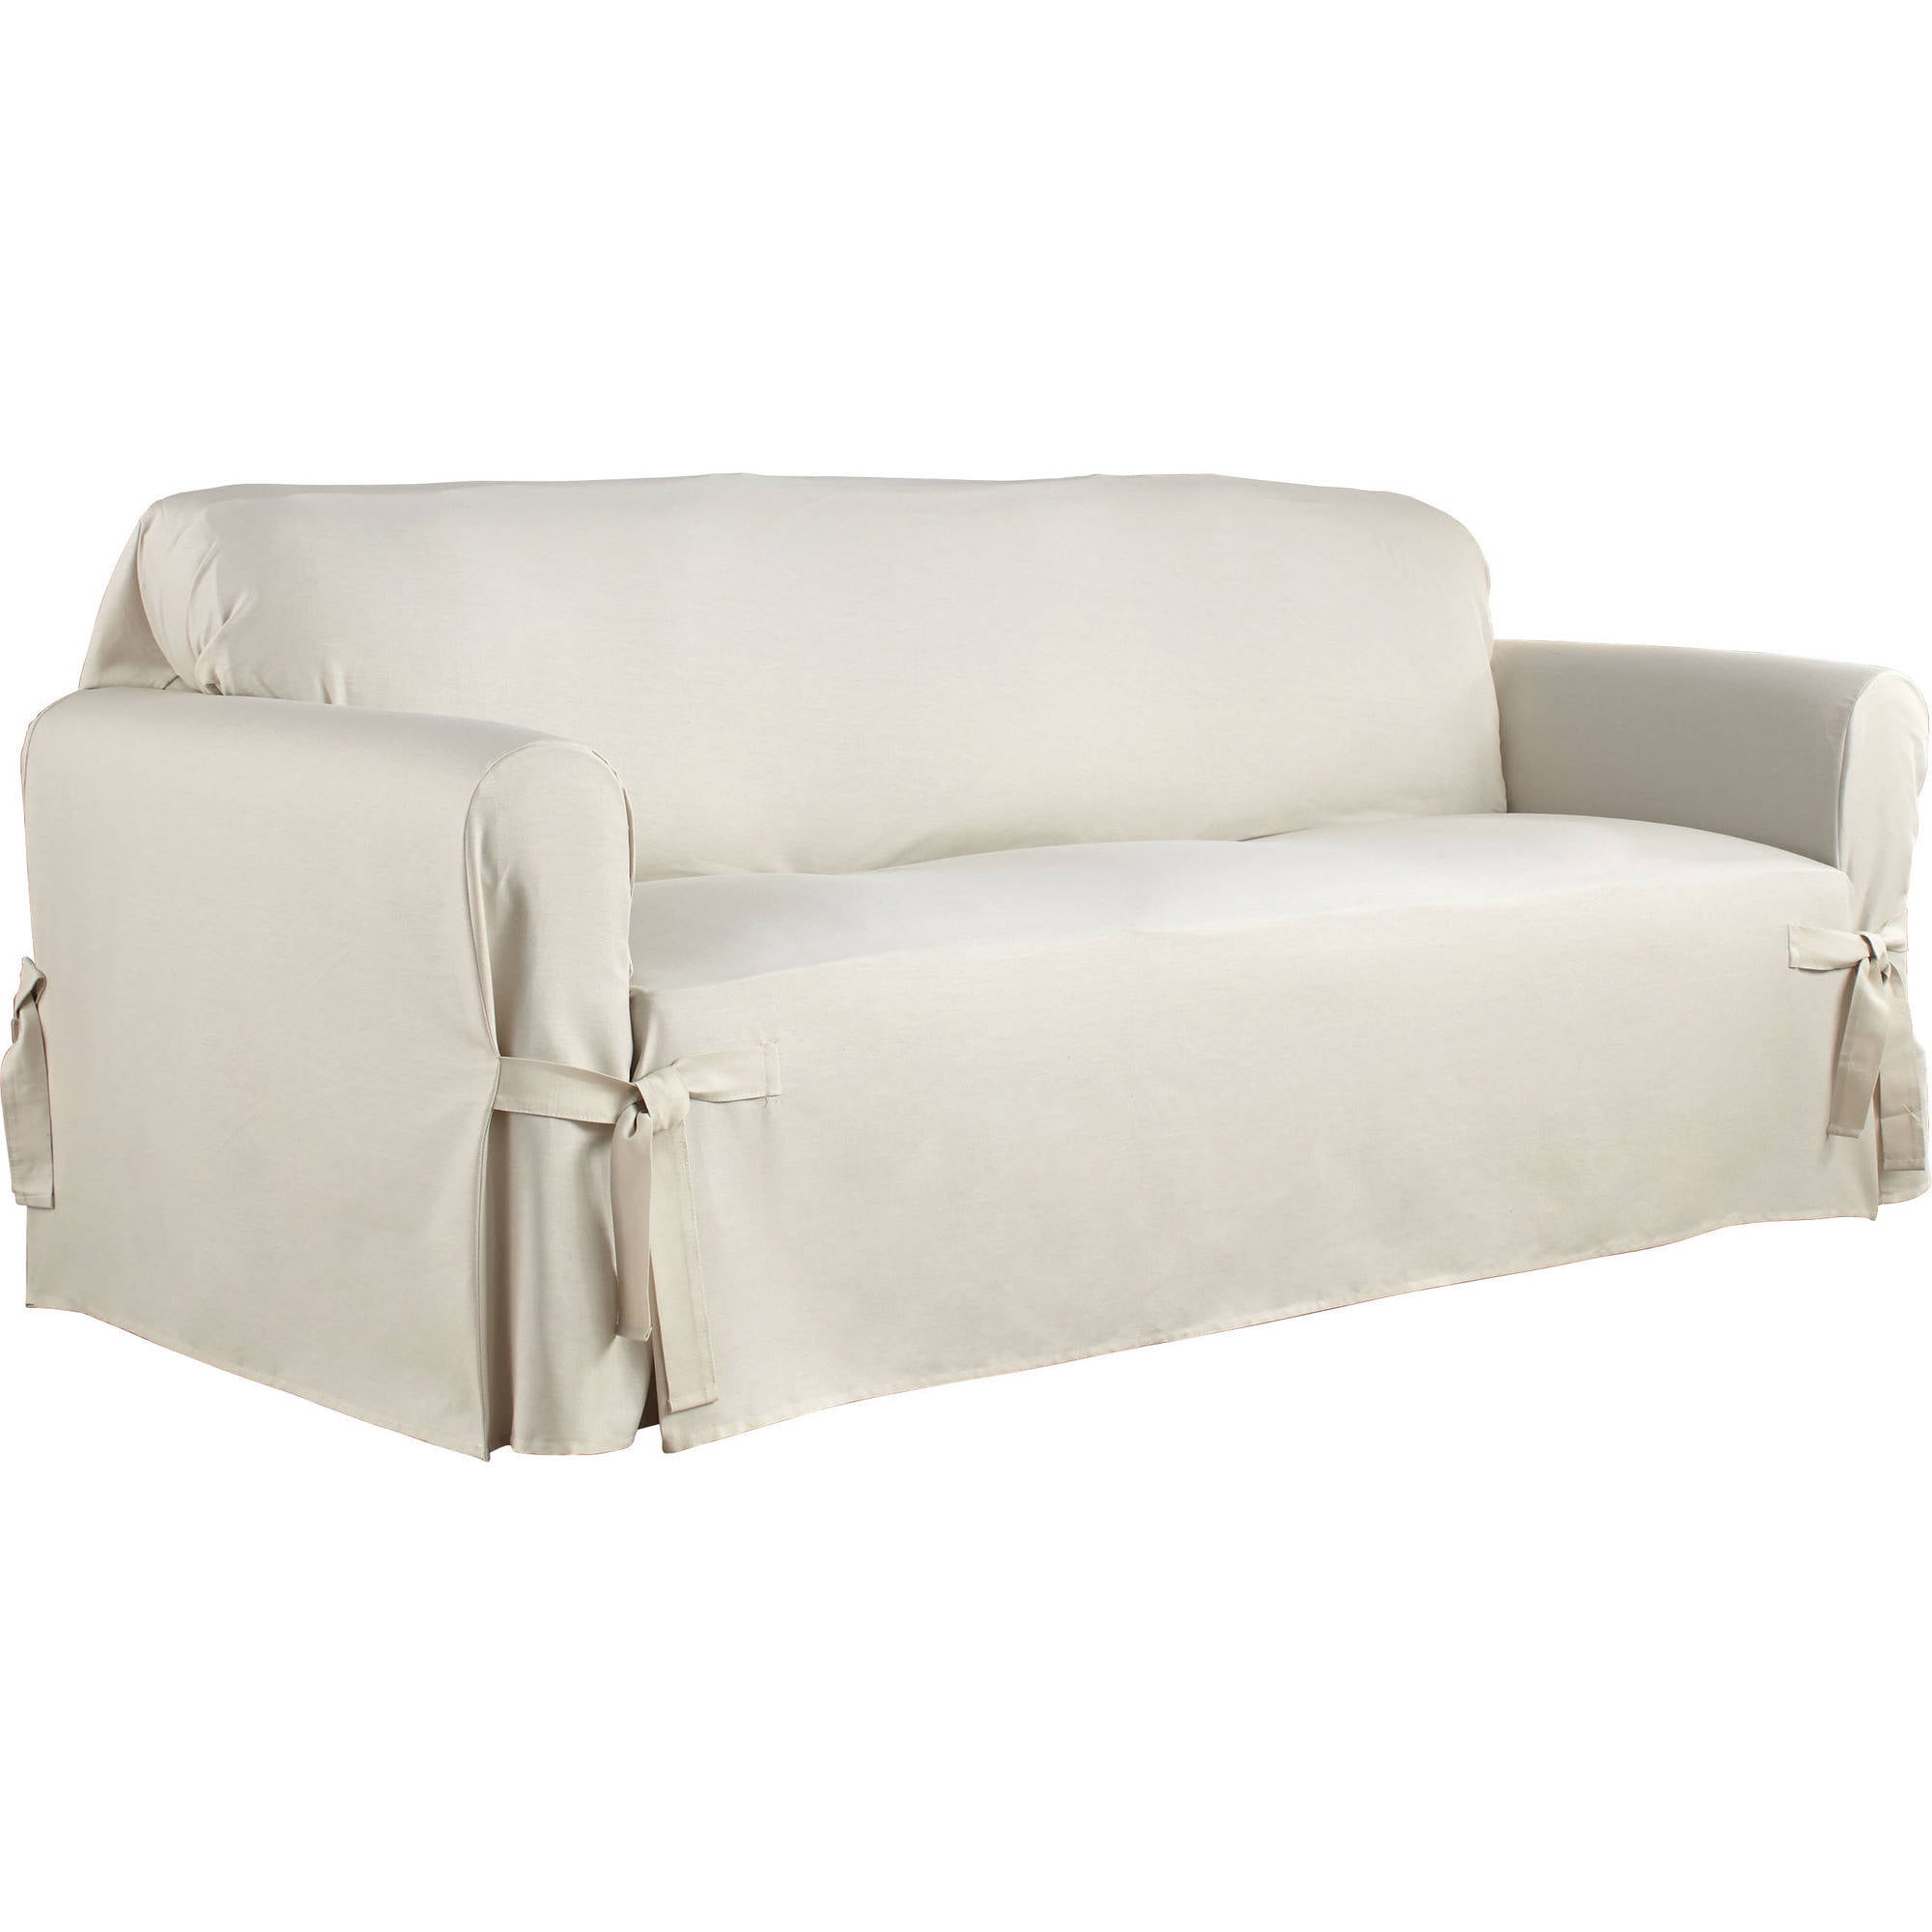 Serta 848004 1 Piece Reversible Stretch Suede Box Sofa Slipcover Brown/Ivory